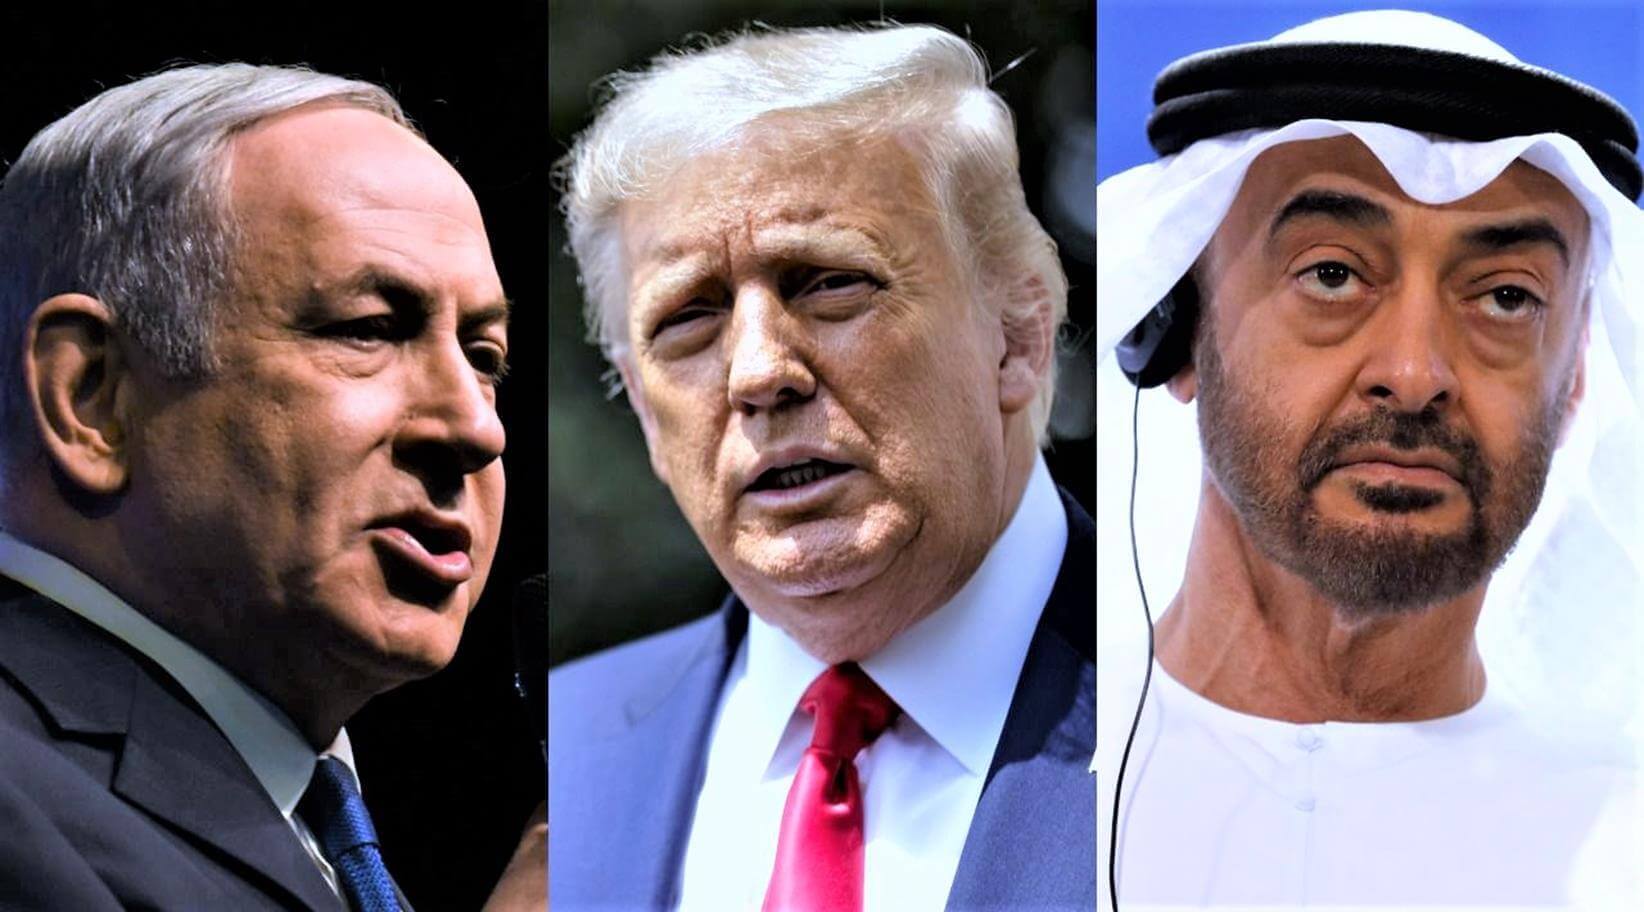 UAE, Israel Sign ‘Historic’ US-Brokered Deal to Normalize Relations